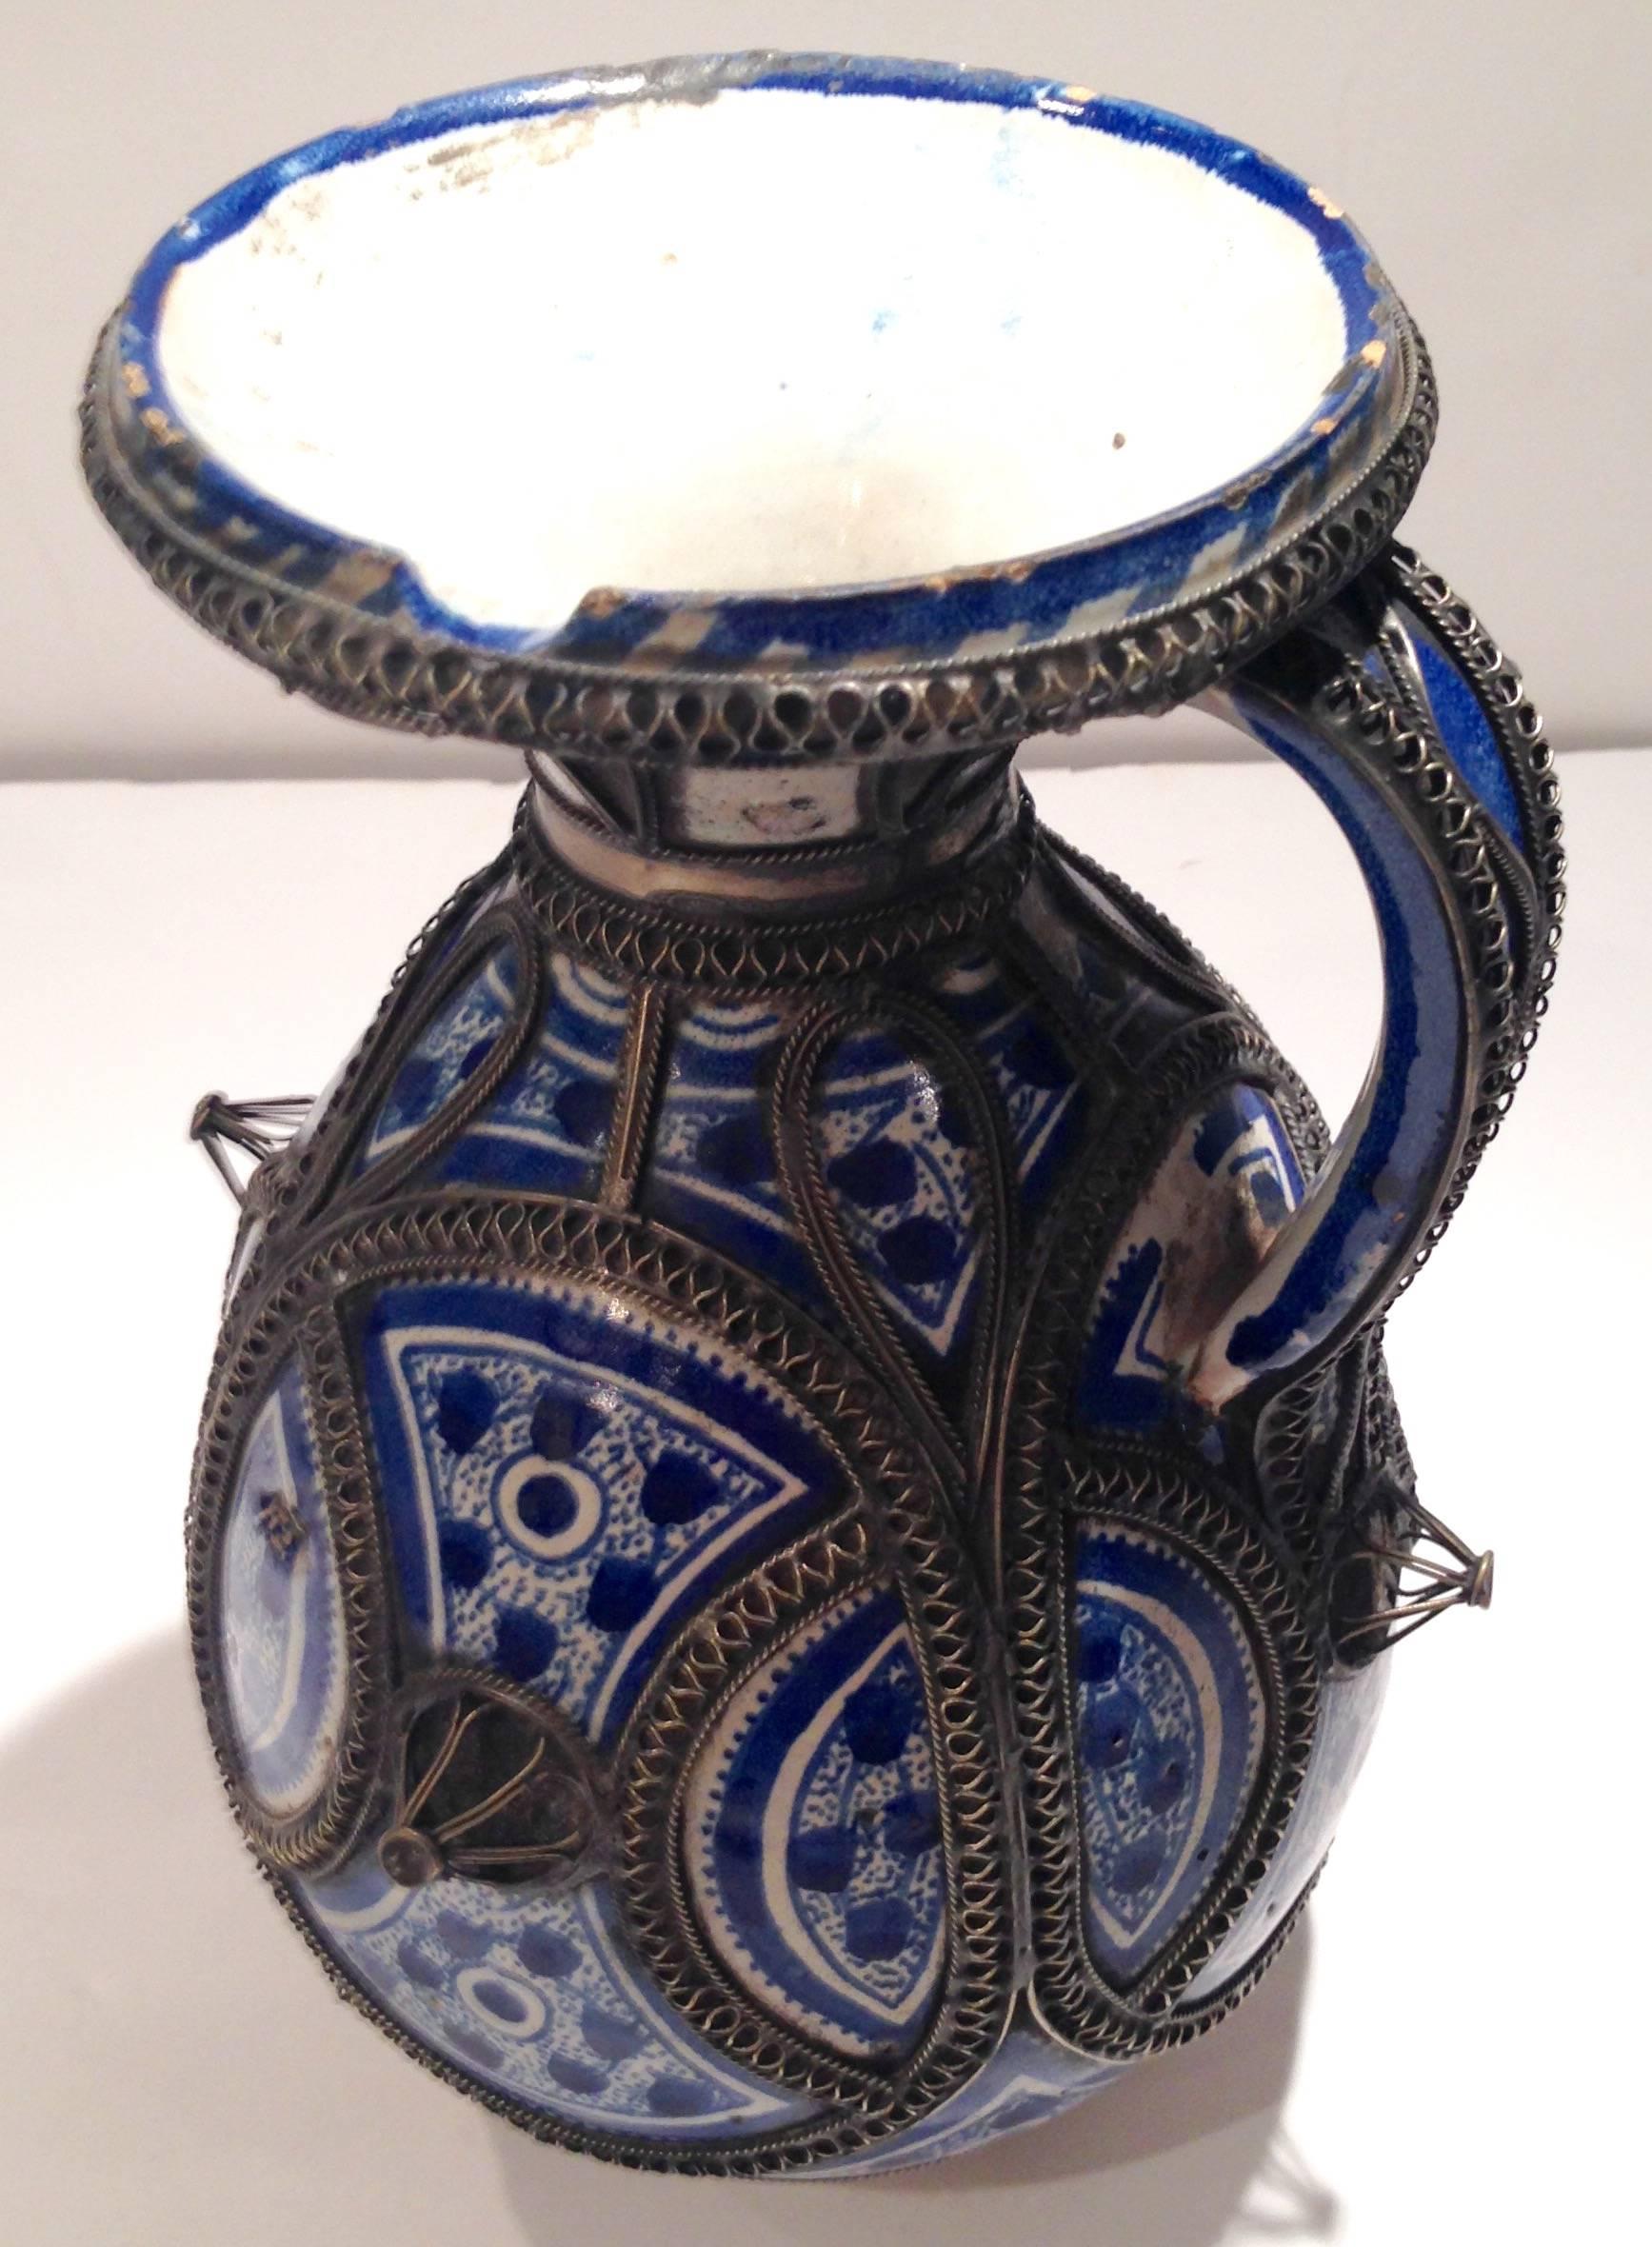 Rare handmade pottery handled pitcher from Fez, Morocco. Decorated in blue and white (Bleu-de-Fez), designs enhanced further with a very ornate example of the technique called 